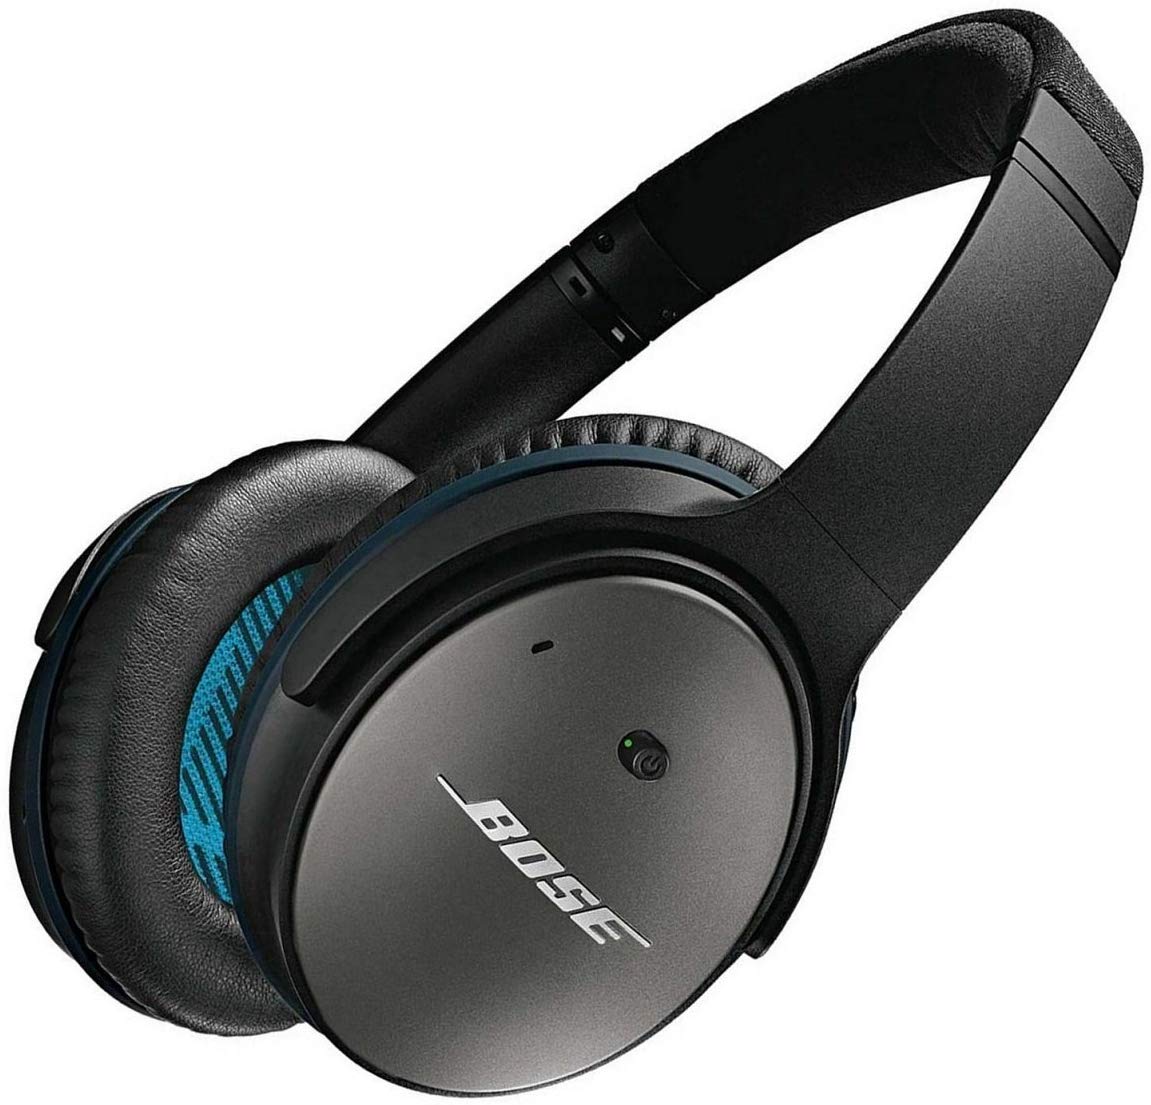 Bose QuietComfort 25 Acoustic Noise Cancelling Headphones for Apple devices